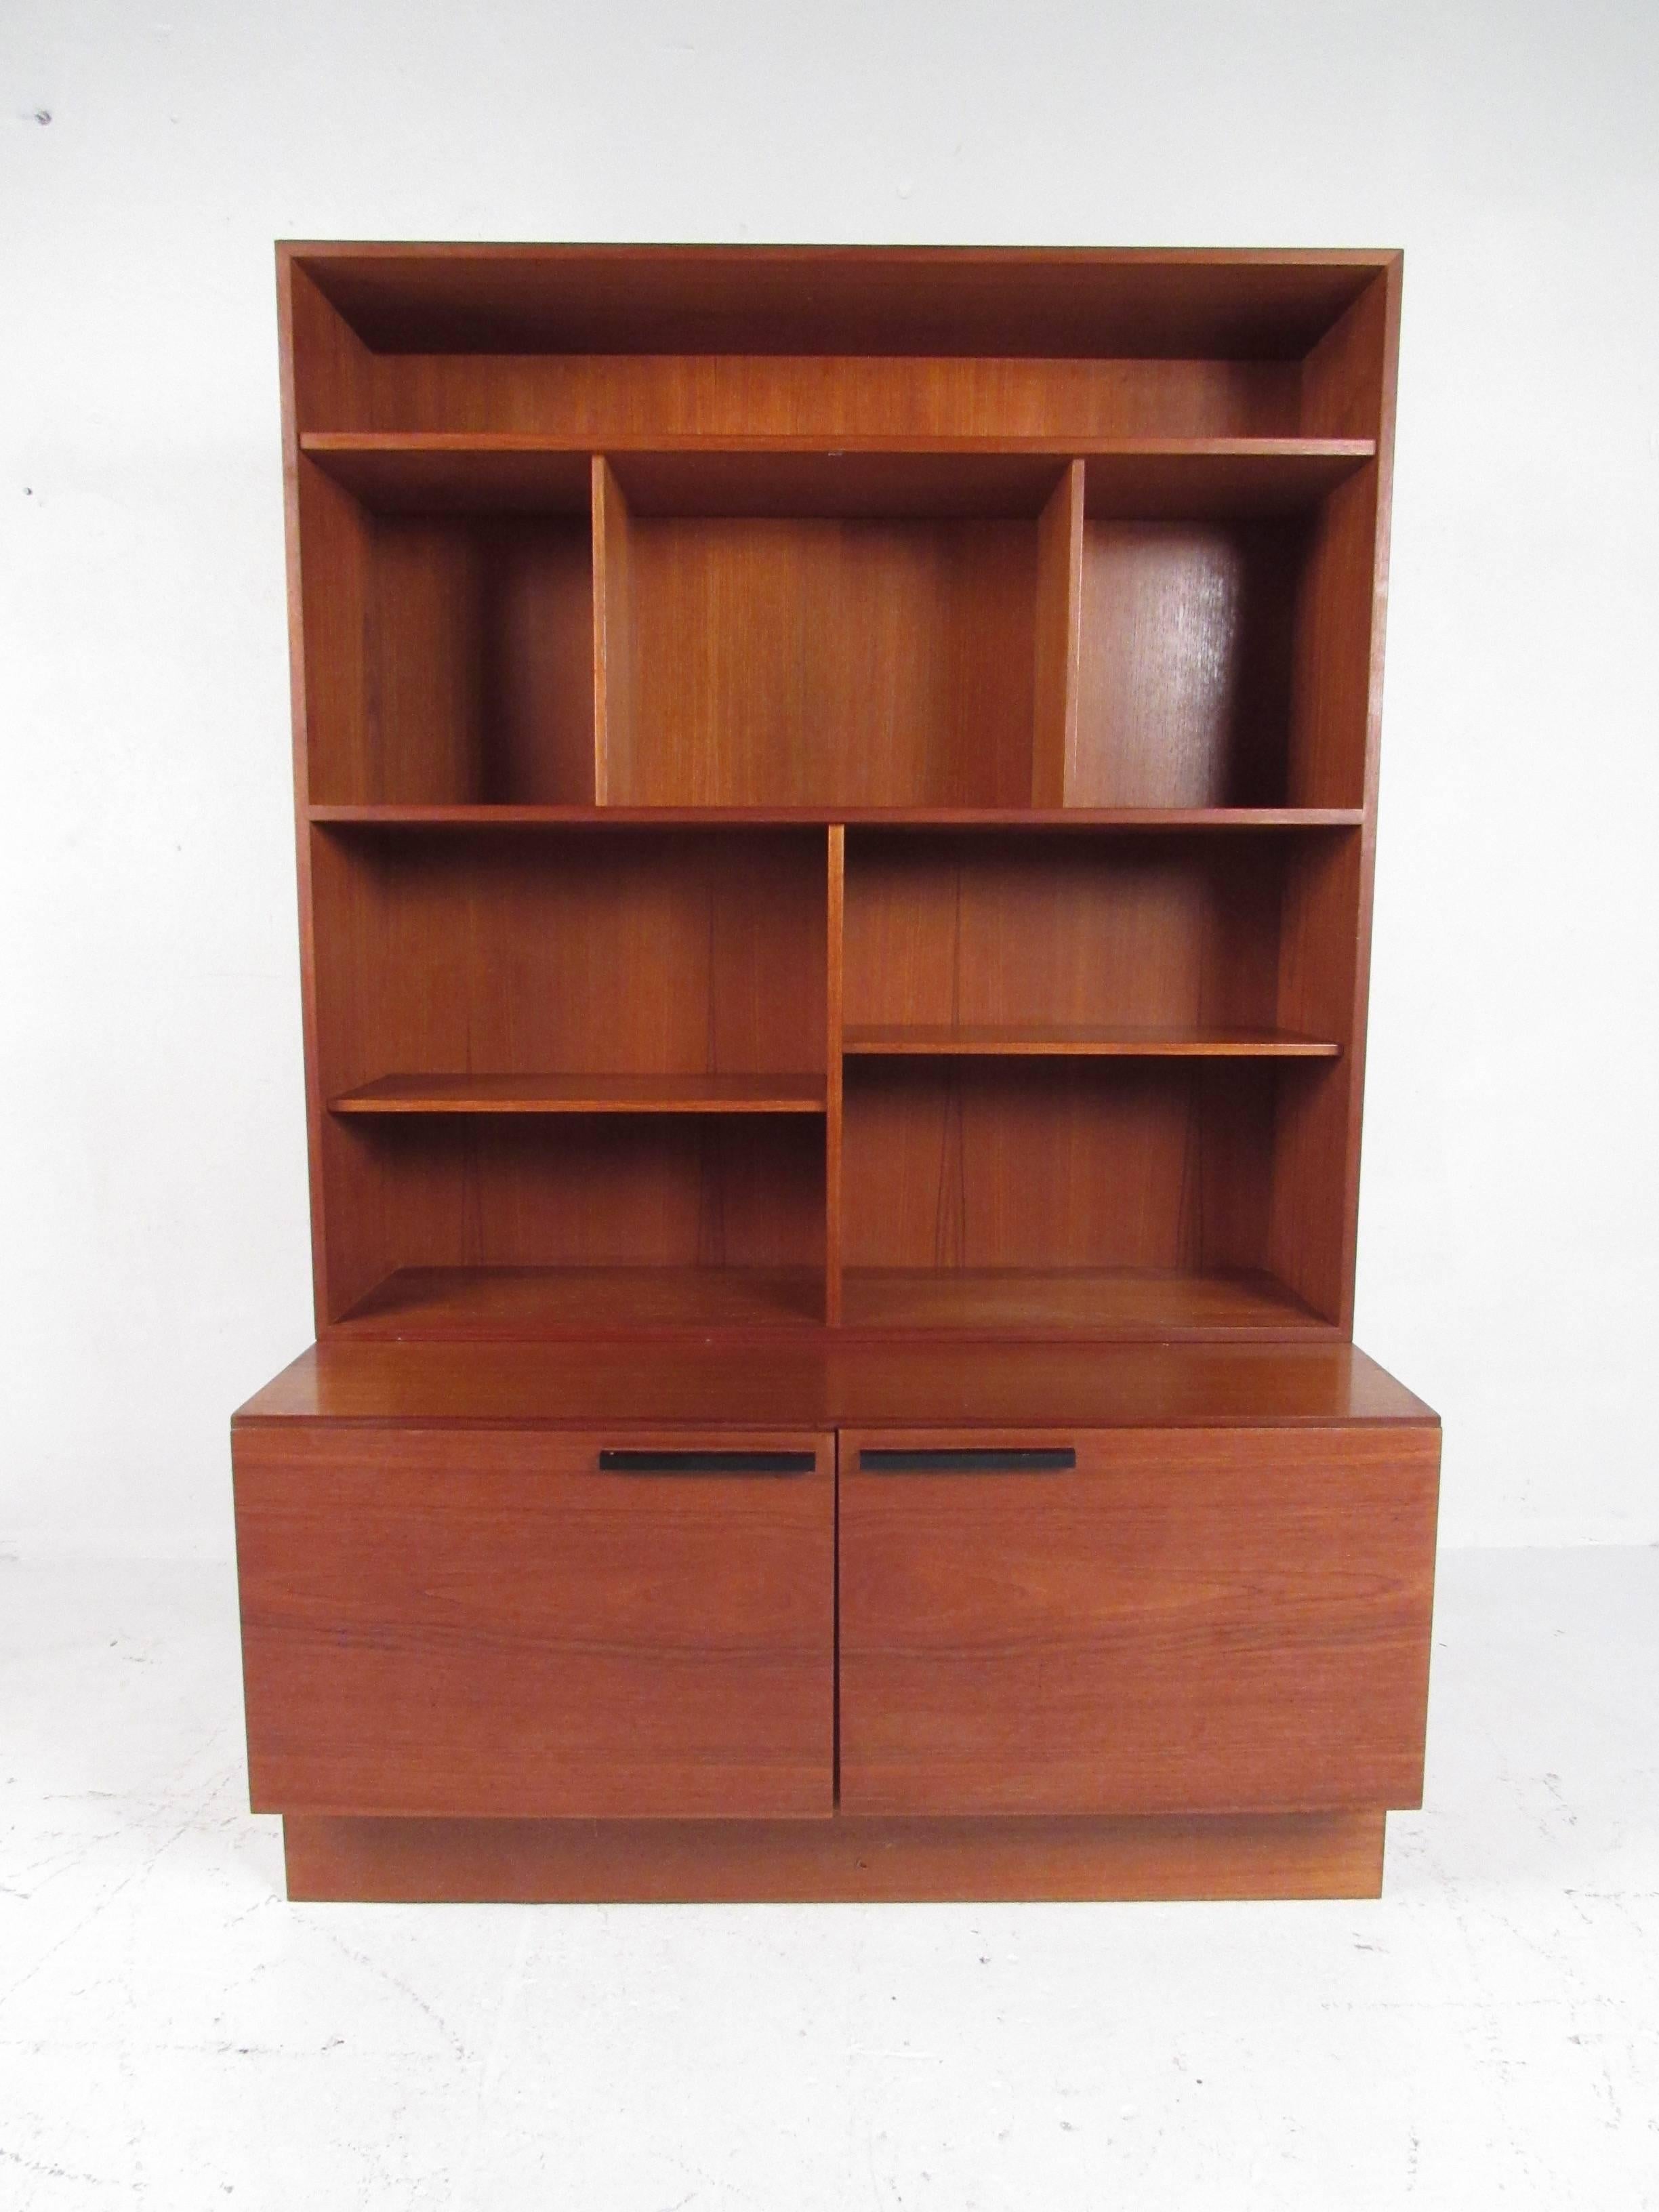 This Scandinavian Modern bookshelf by Ib-Kofod Larsen features spacious shelf storage and lower cabinets to provide adequate organization and display for home or office. Quality Mid-Century Modern Reolsystem wall unit design includes teak